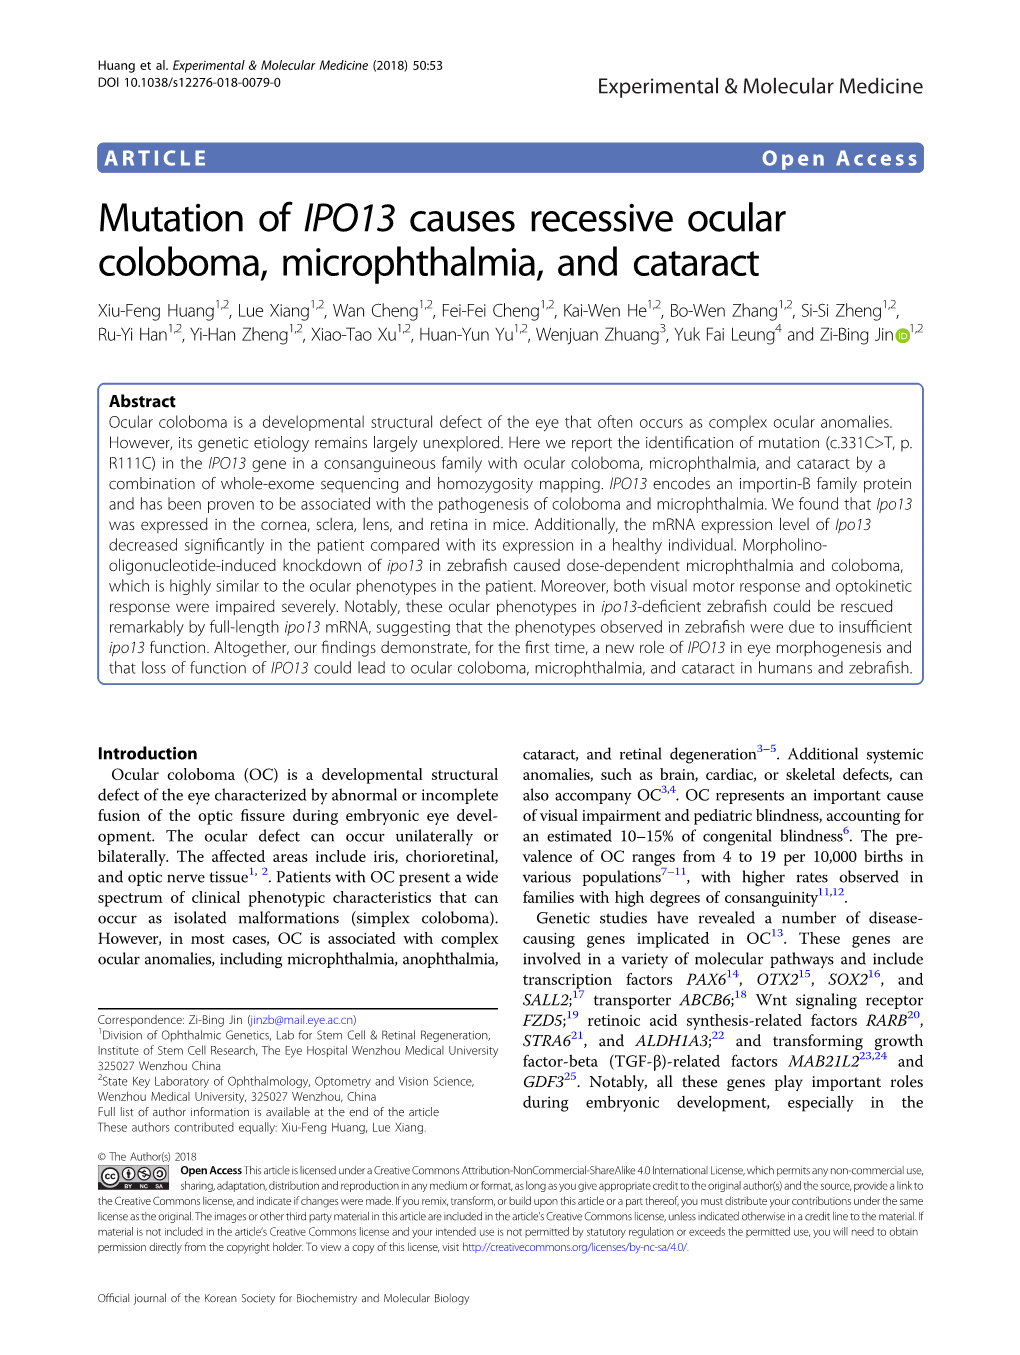 Mutation of IPO13 Causes Recessive Ocular Coloboma, Microphthalmia